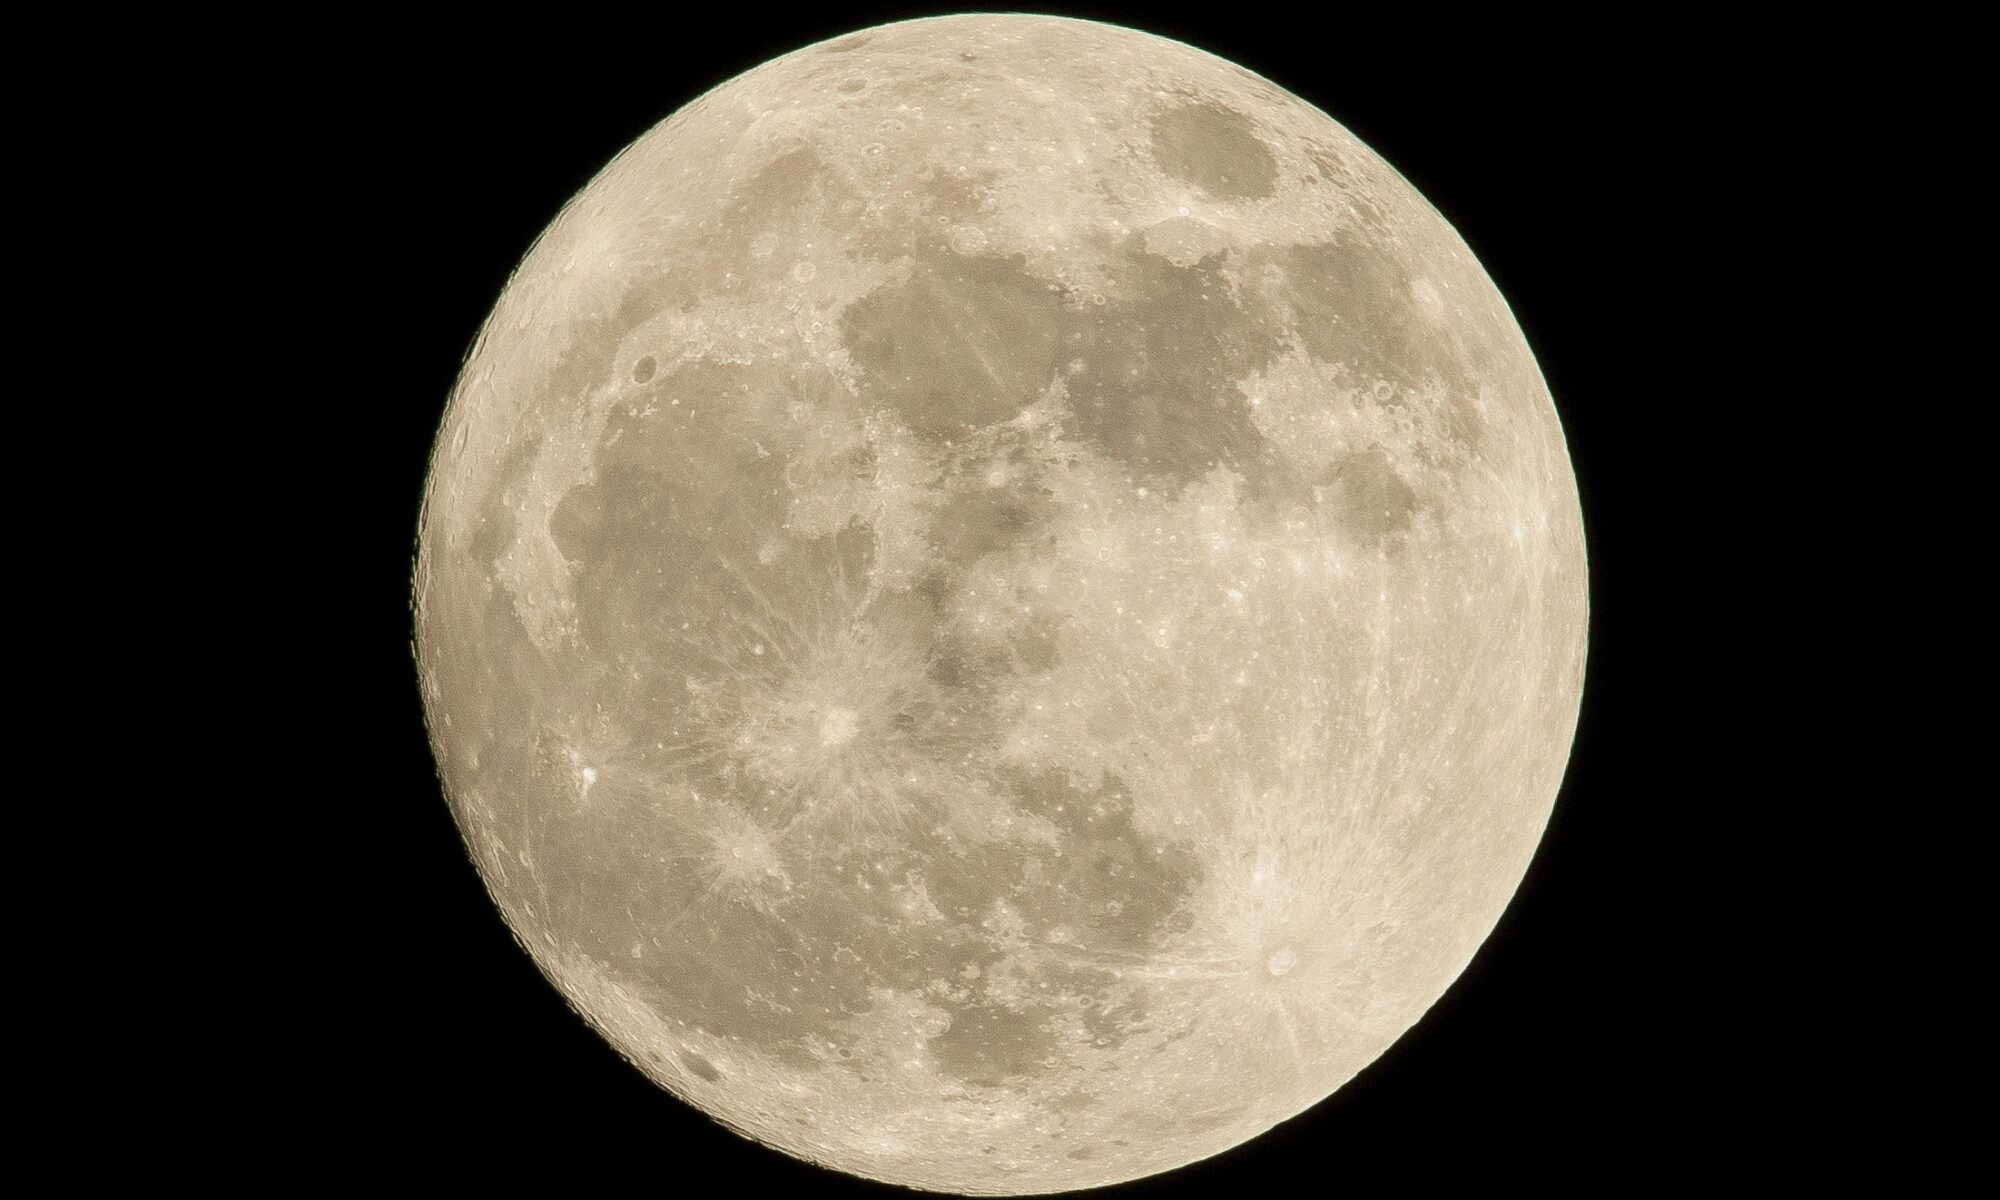 Image shows a picture of the moon white with grey shadows on its surface against a black sky